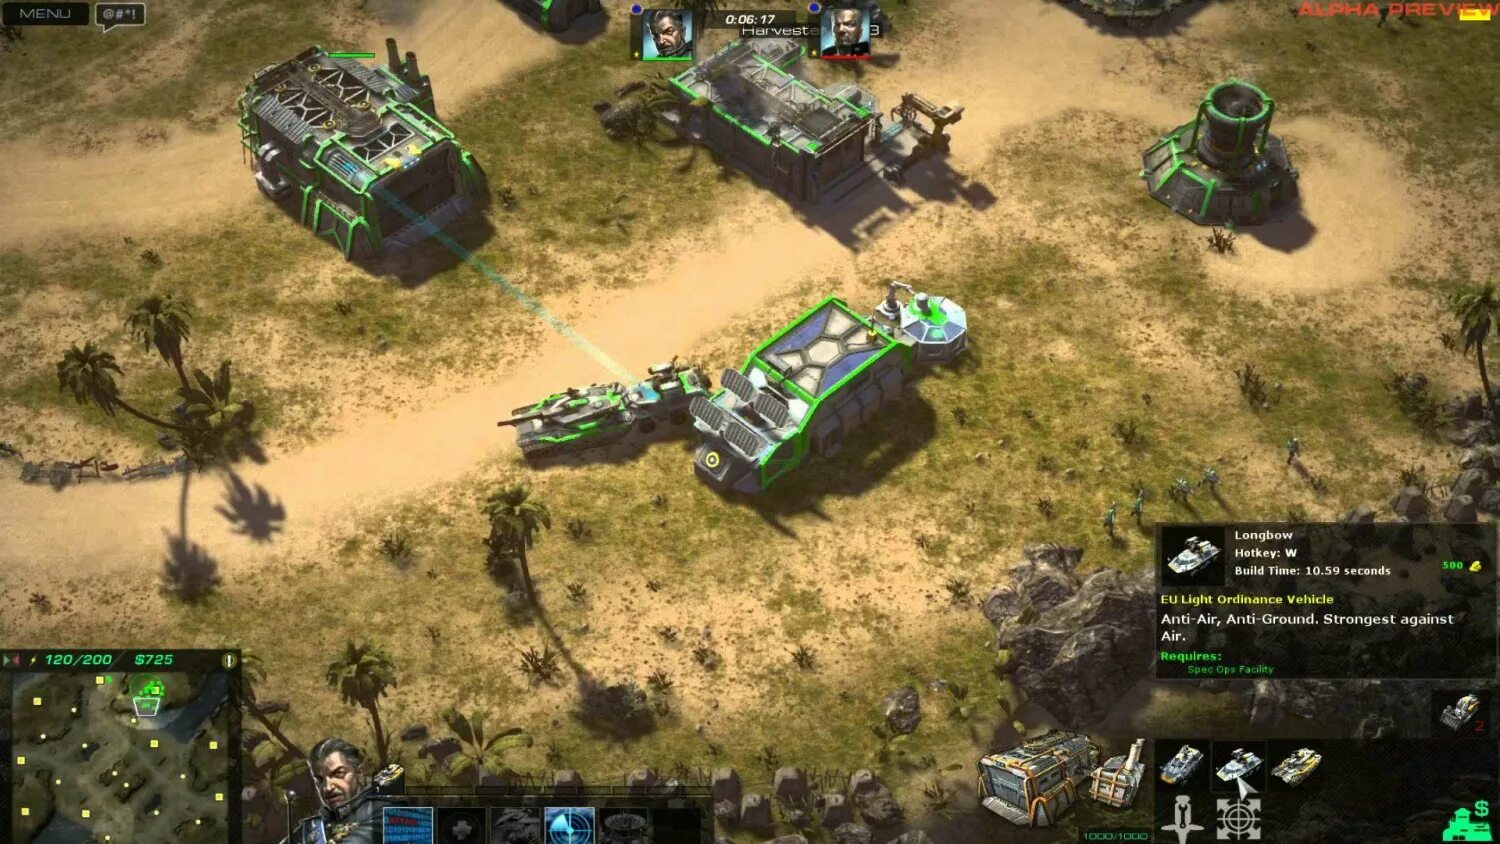 Command Conquer 2 Remastered collection. Generals 2 Gameplay. Command & Conquer Remastered collection. Command and Conquer 2019. Generals server